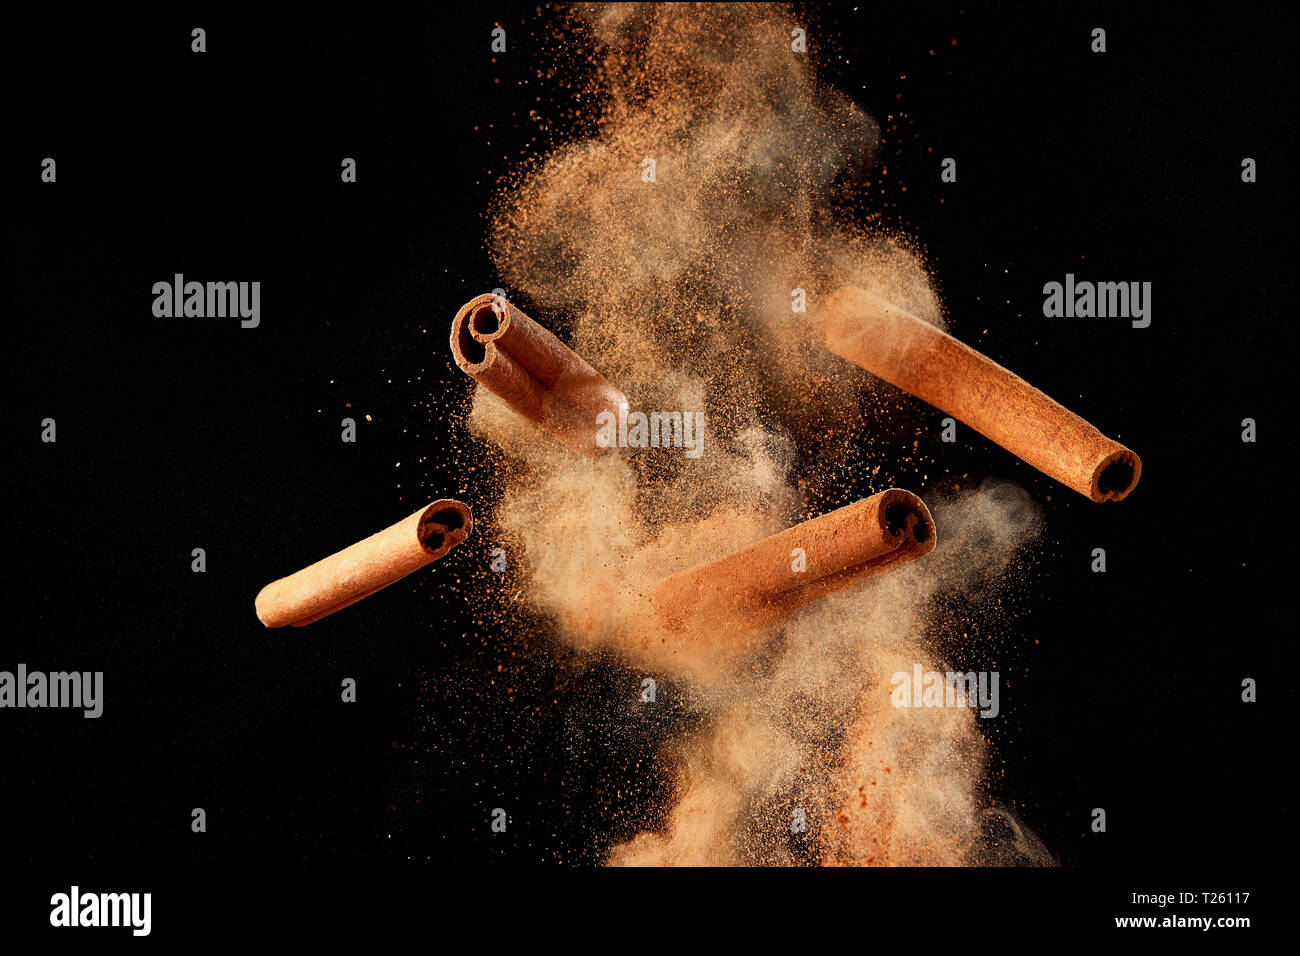 Food explosion with cinnamon sticks and powder, on black background. Stock Photo